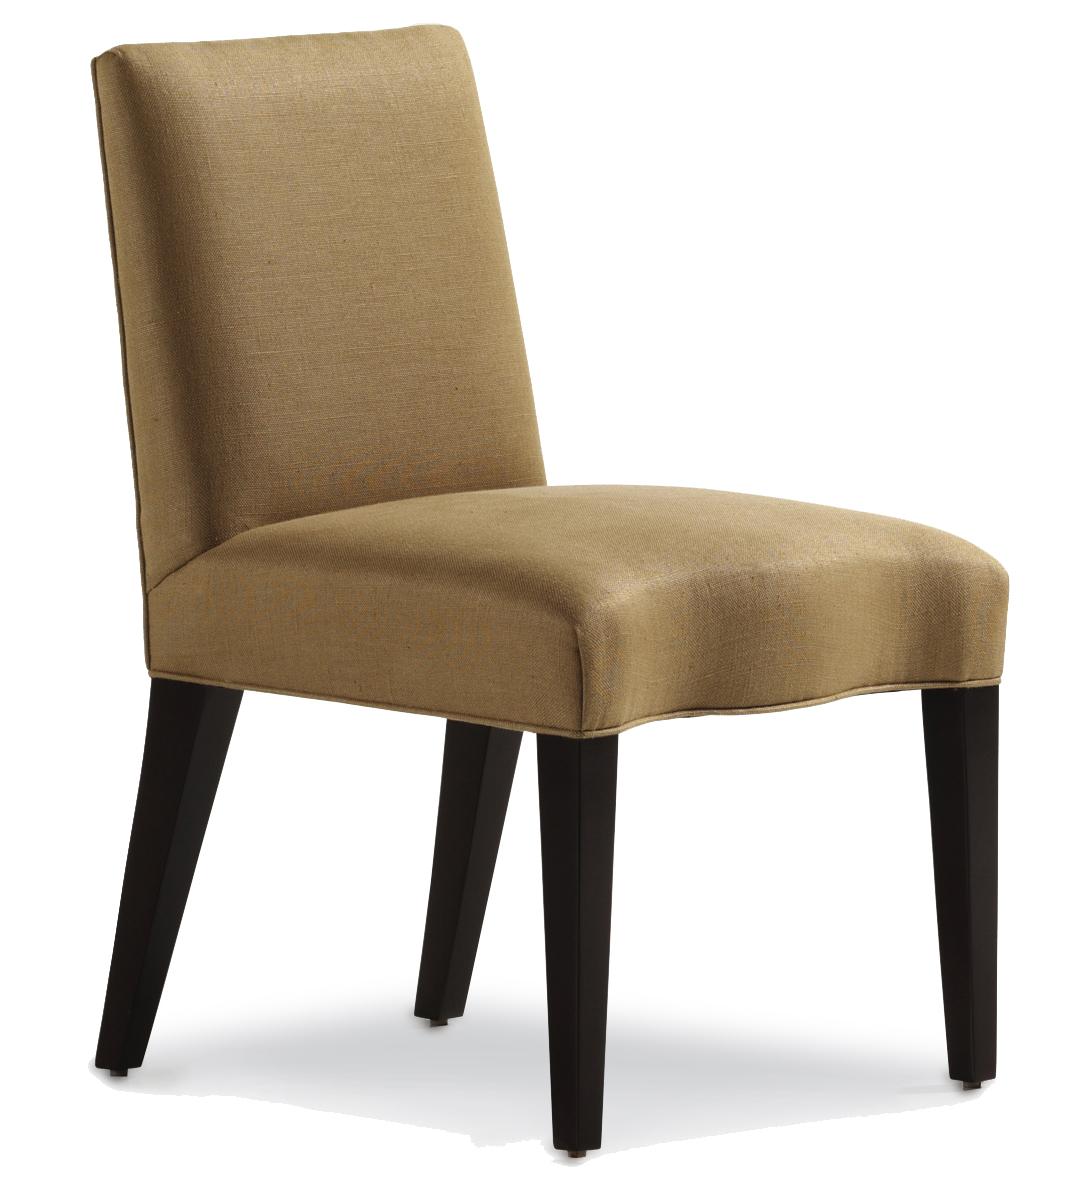 Marr Dining Side Chair   